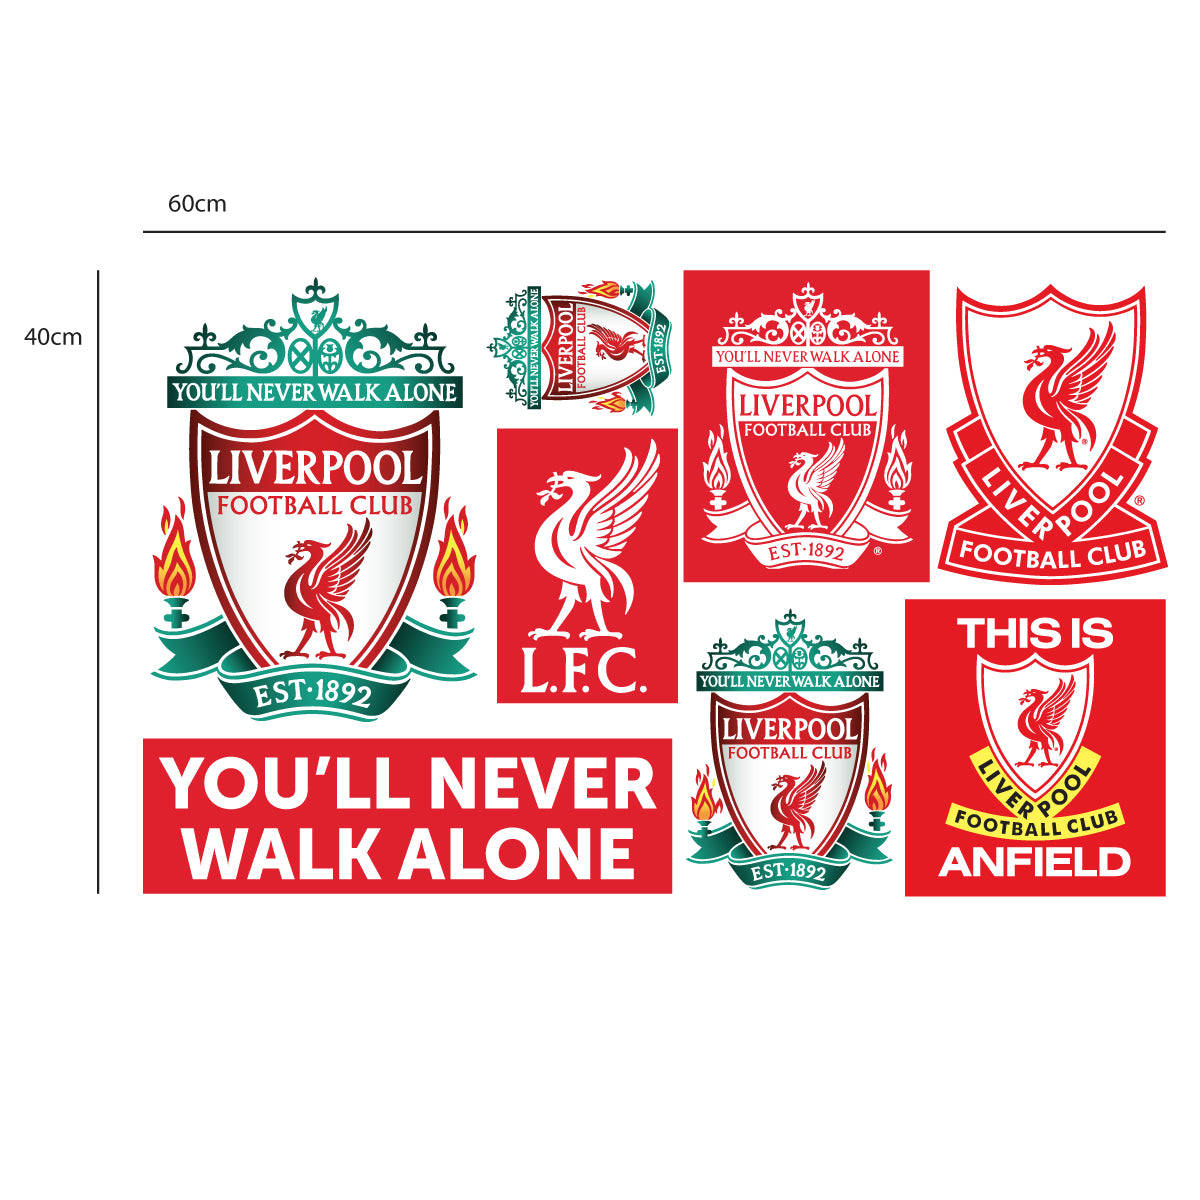 Liverpool Football Club - Smashed Anfield Stadium (View Of The Kop) Wall Mural + LFC Wall Sticker Set